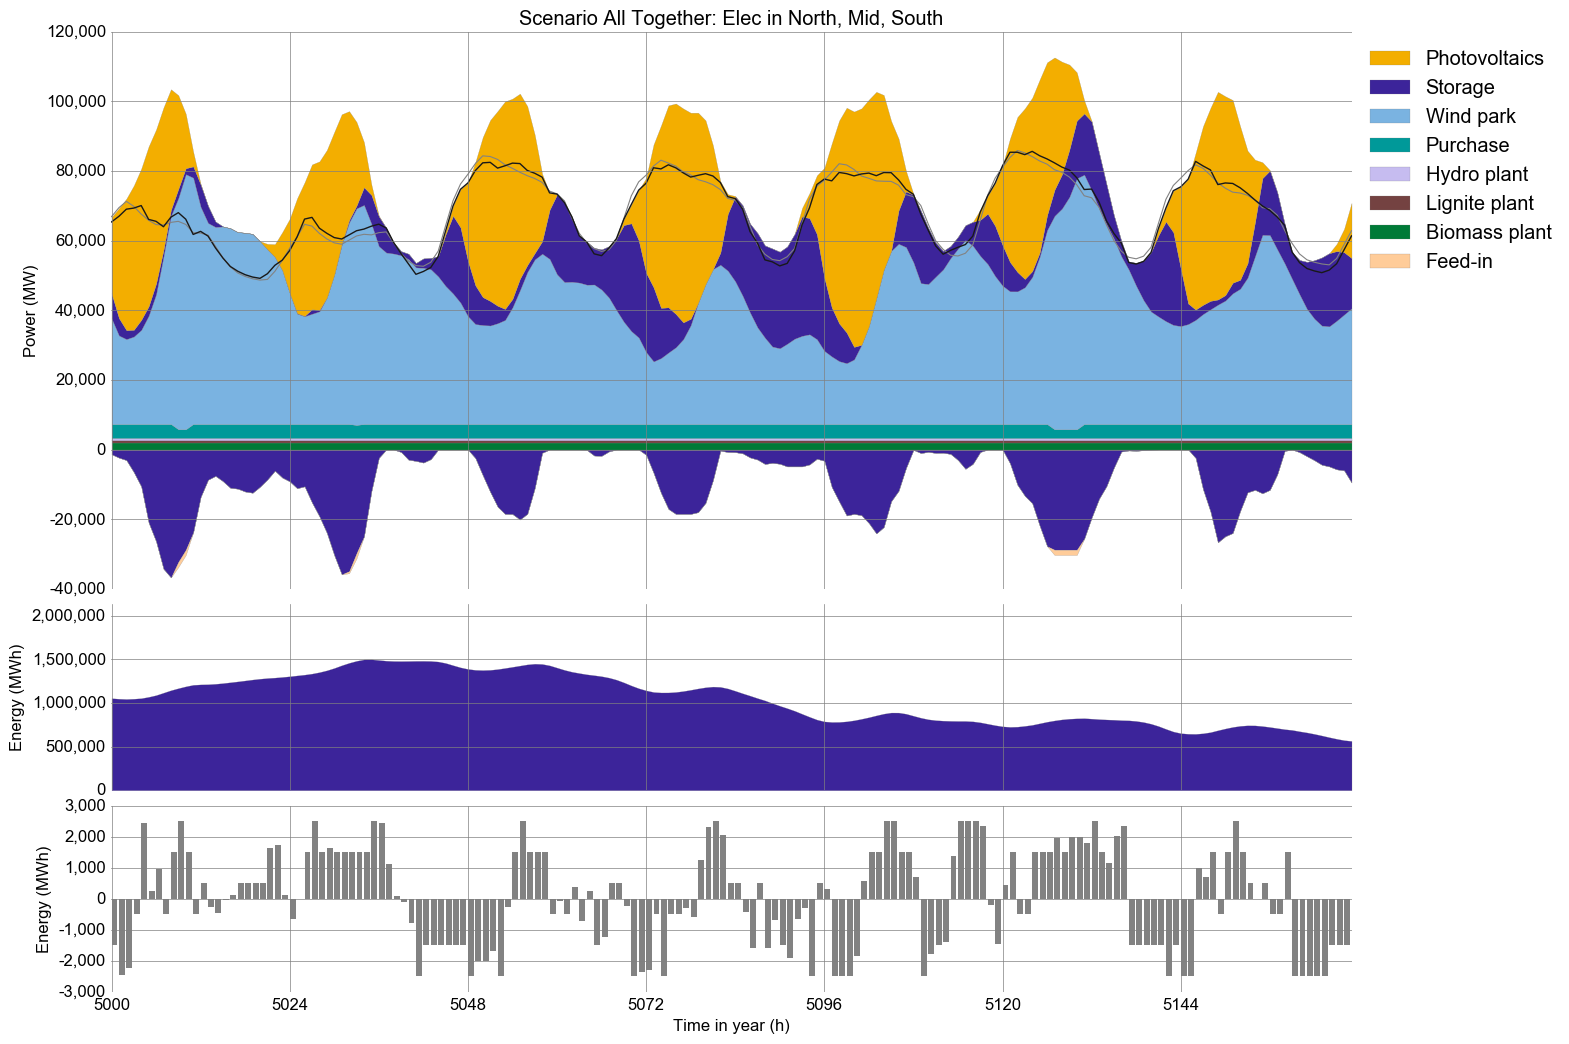 Timeseries plot of 8 days of electricity generation in vertex 'North' in scenario_all_together in hourly resolution: Hydro and biomass provide flat base load of about 50% to cover the daily fluctuating load, while large share of wind and small part photovoltaic generation cover the rest, supported by a day-night storage.